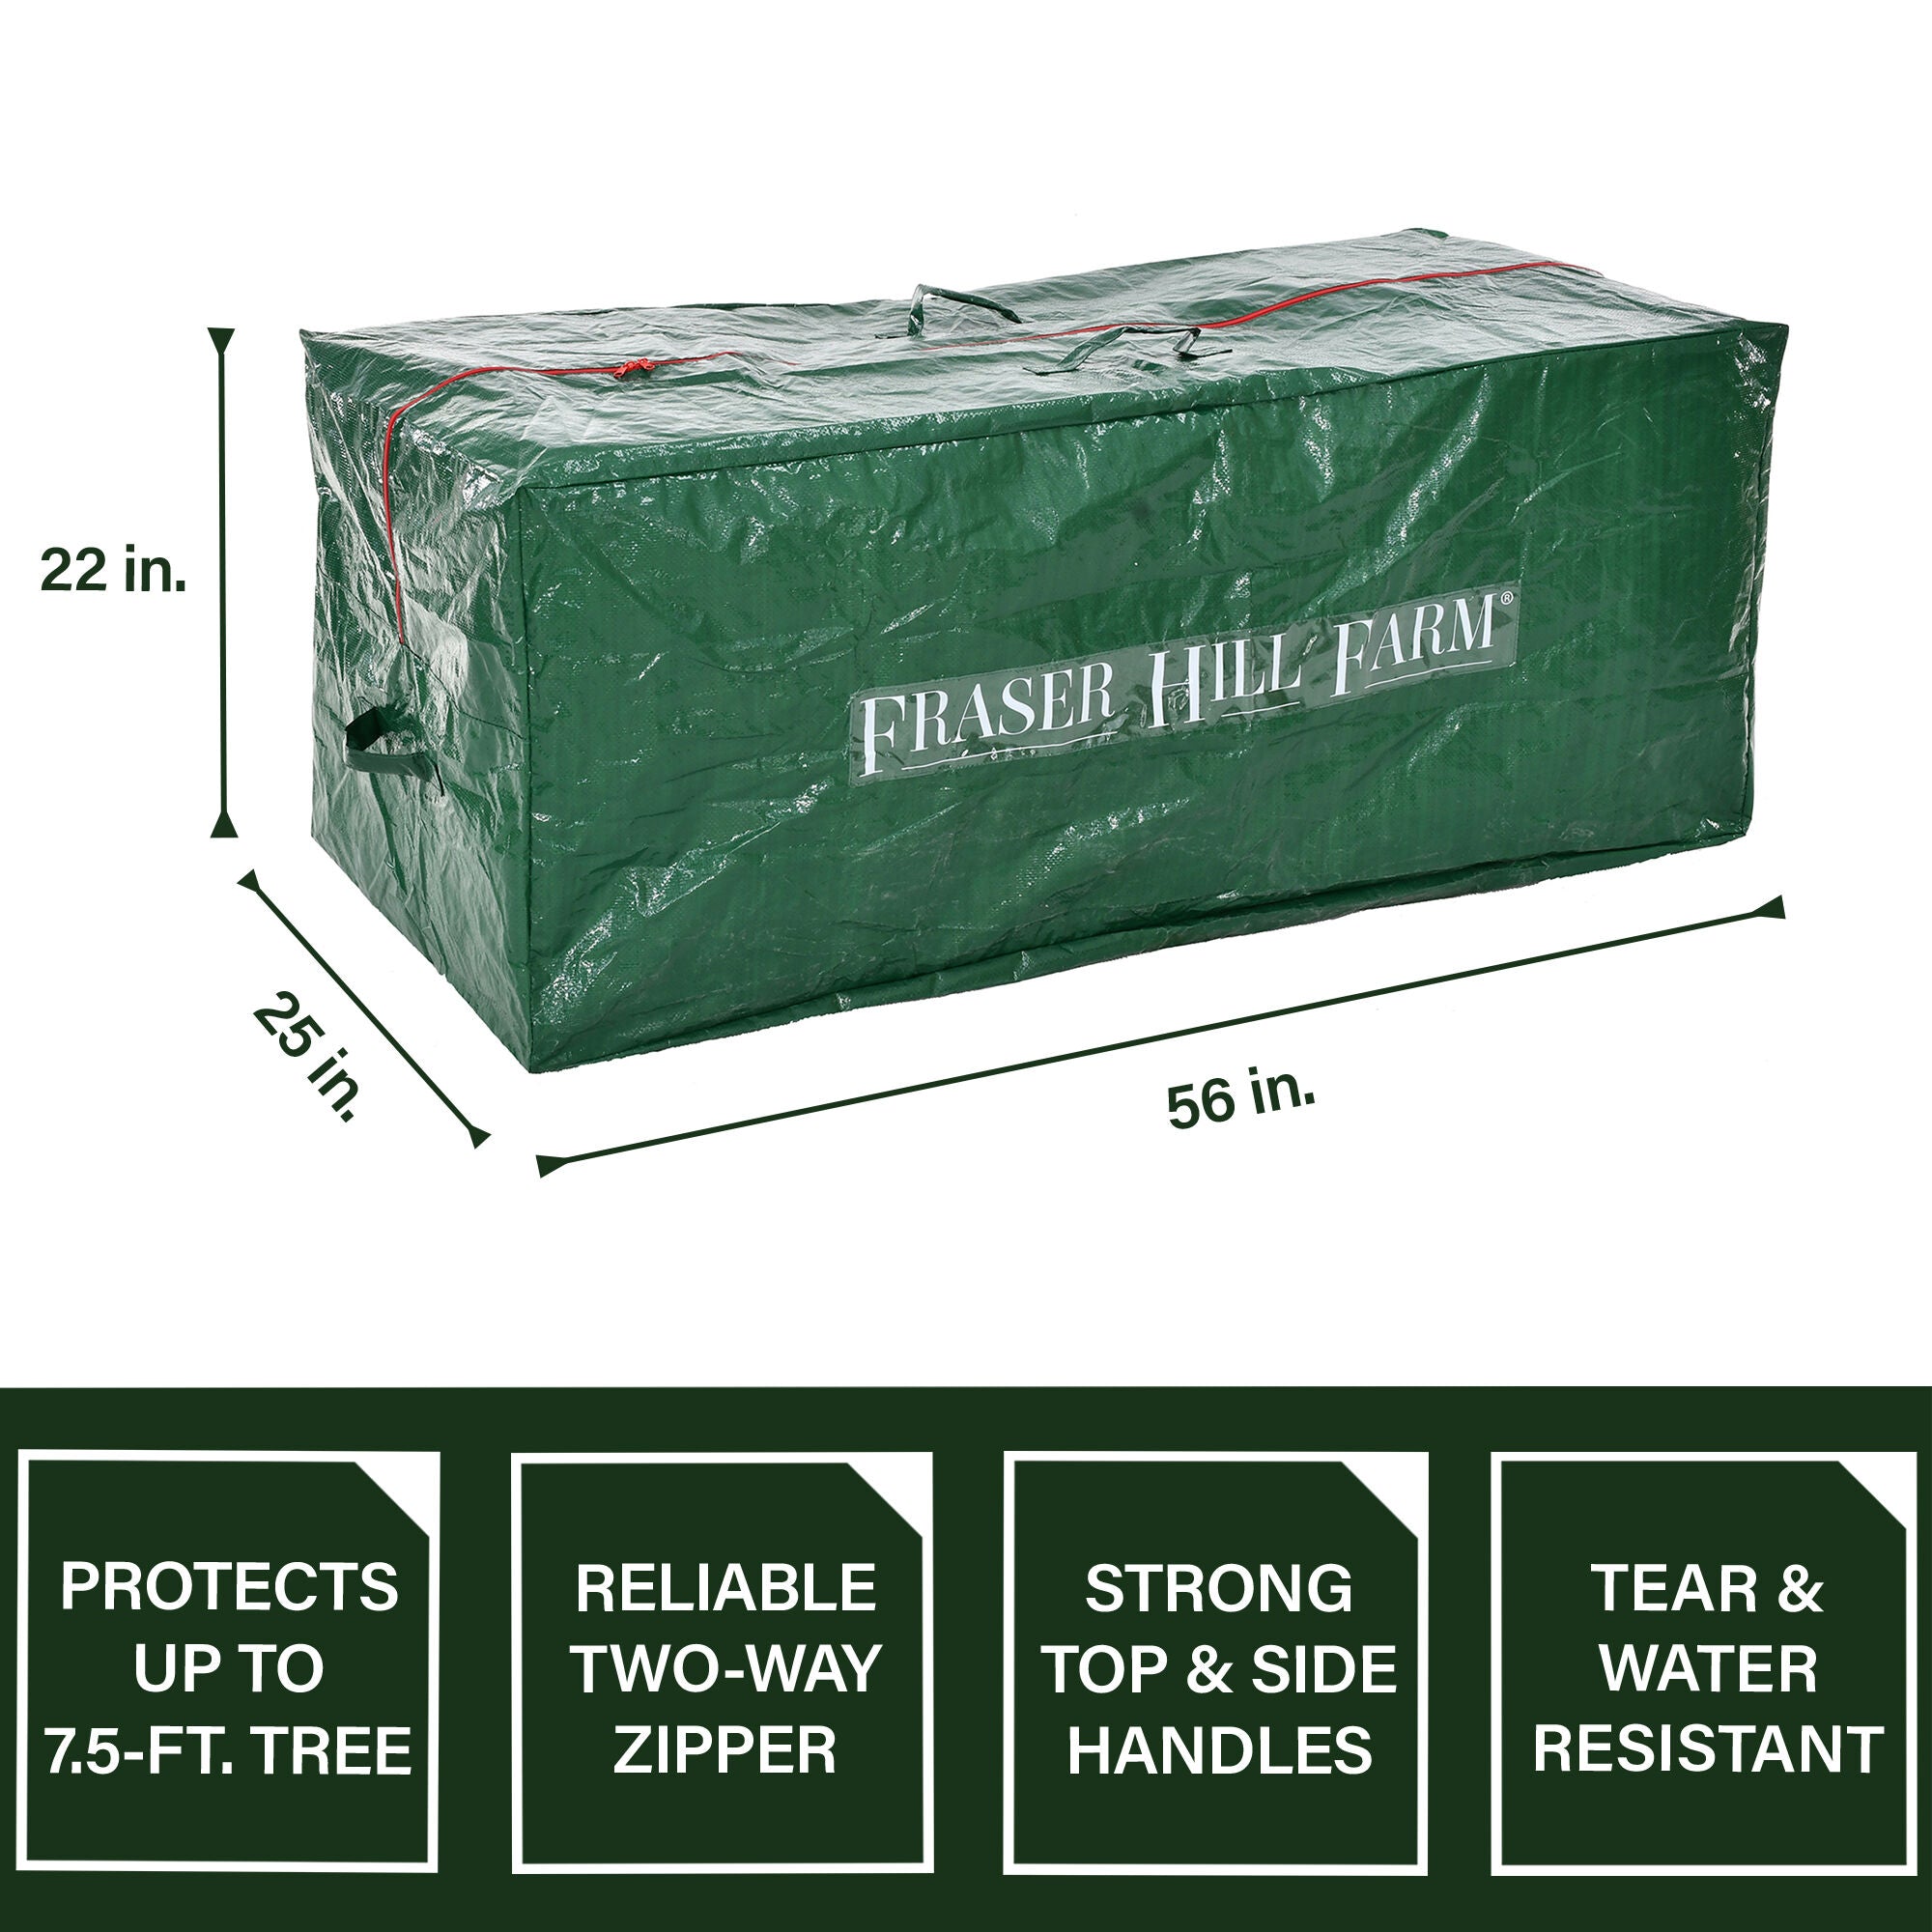 Fraser Hill Farm -  Heavy-Duty Storage Bag for Christmas Trees Up To 7.5 Feet, Green